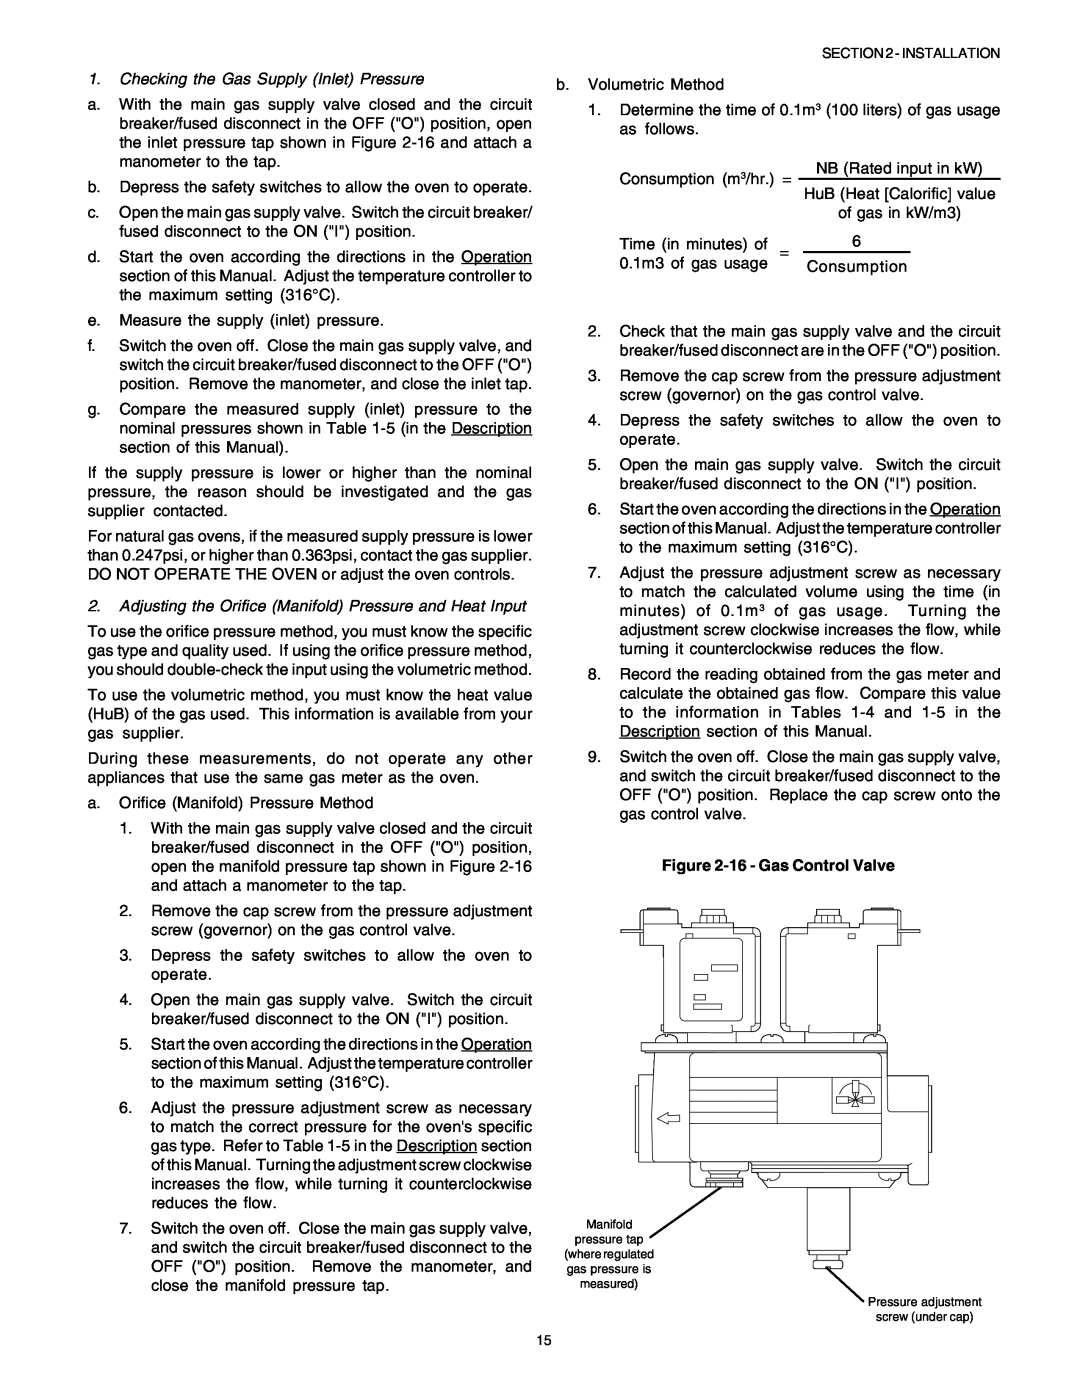 Middleby Marshall PS53GS Gas manual Checking the Gas Supply Inlet Pressure, 16 - Gas Control Valve 